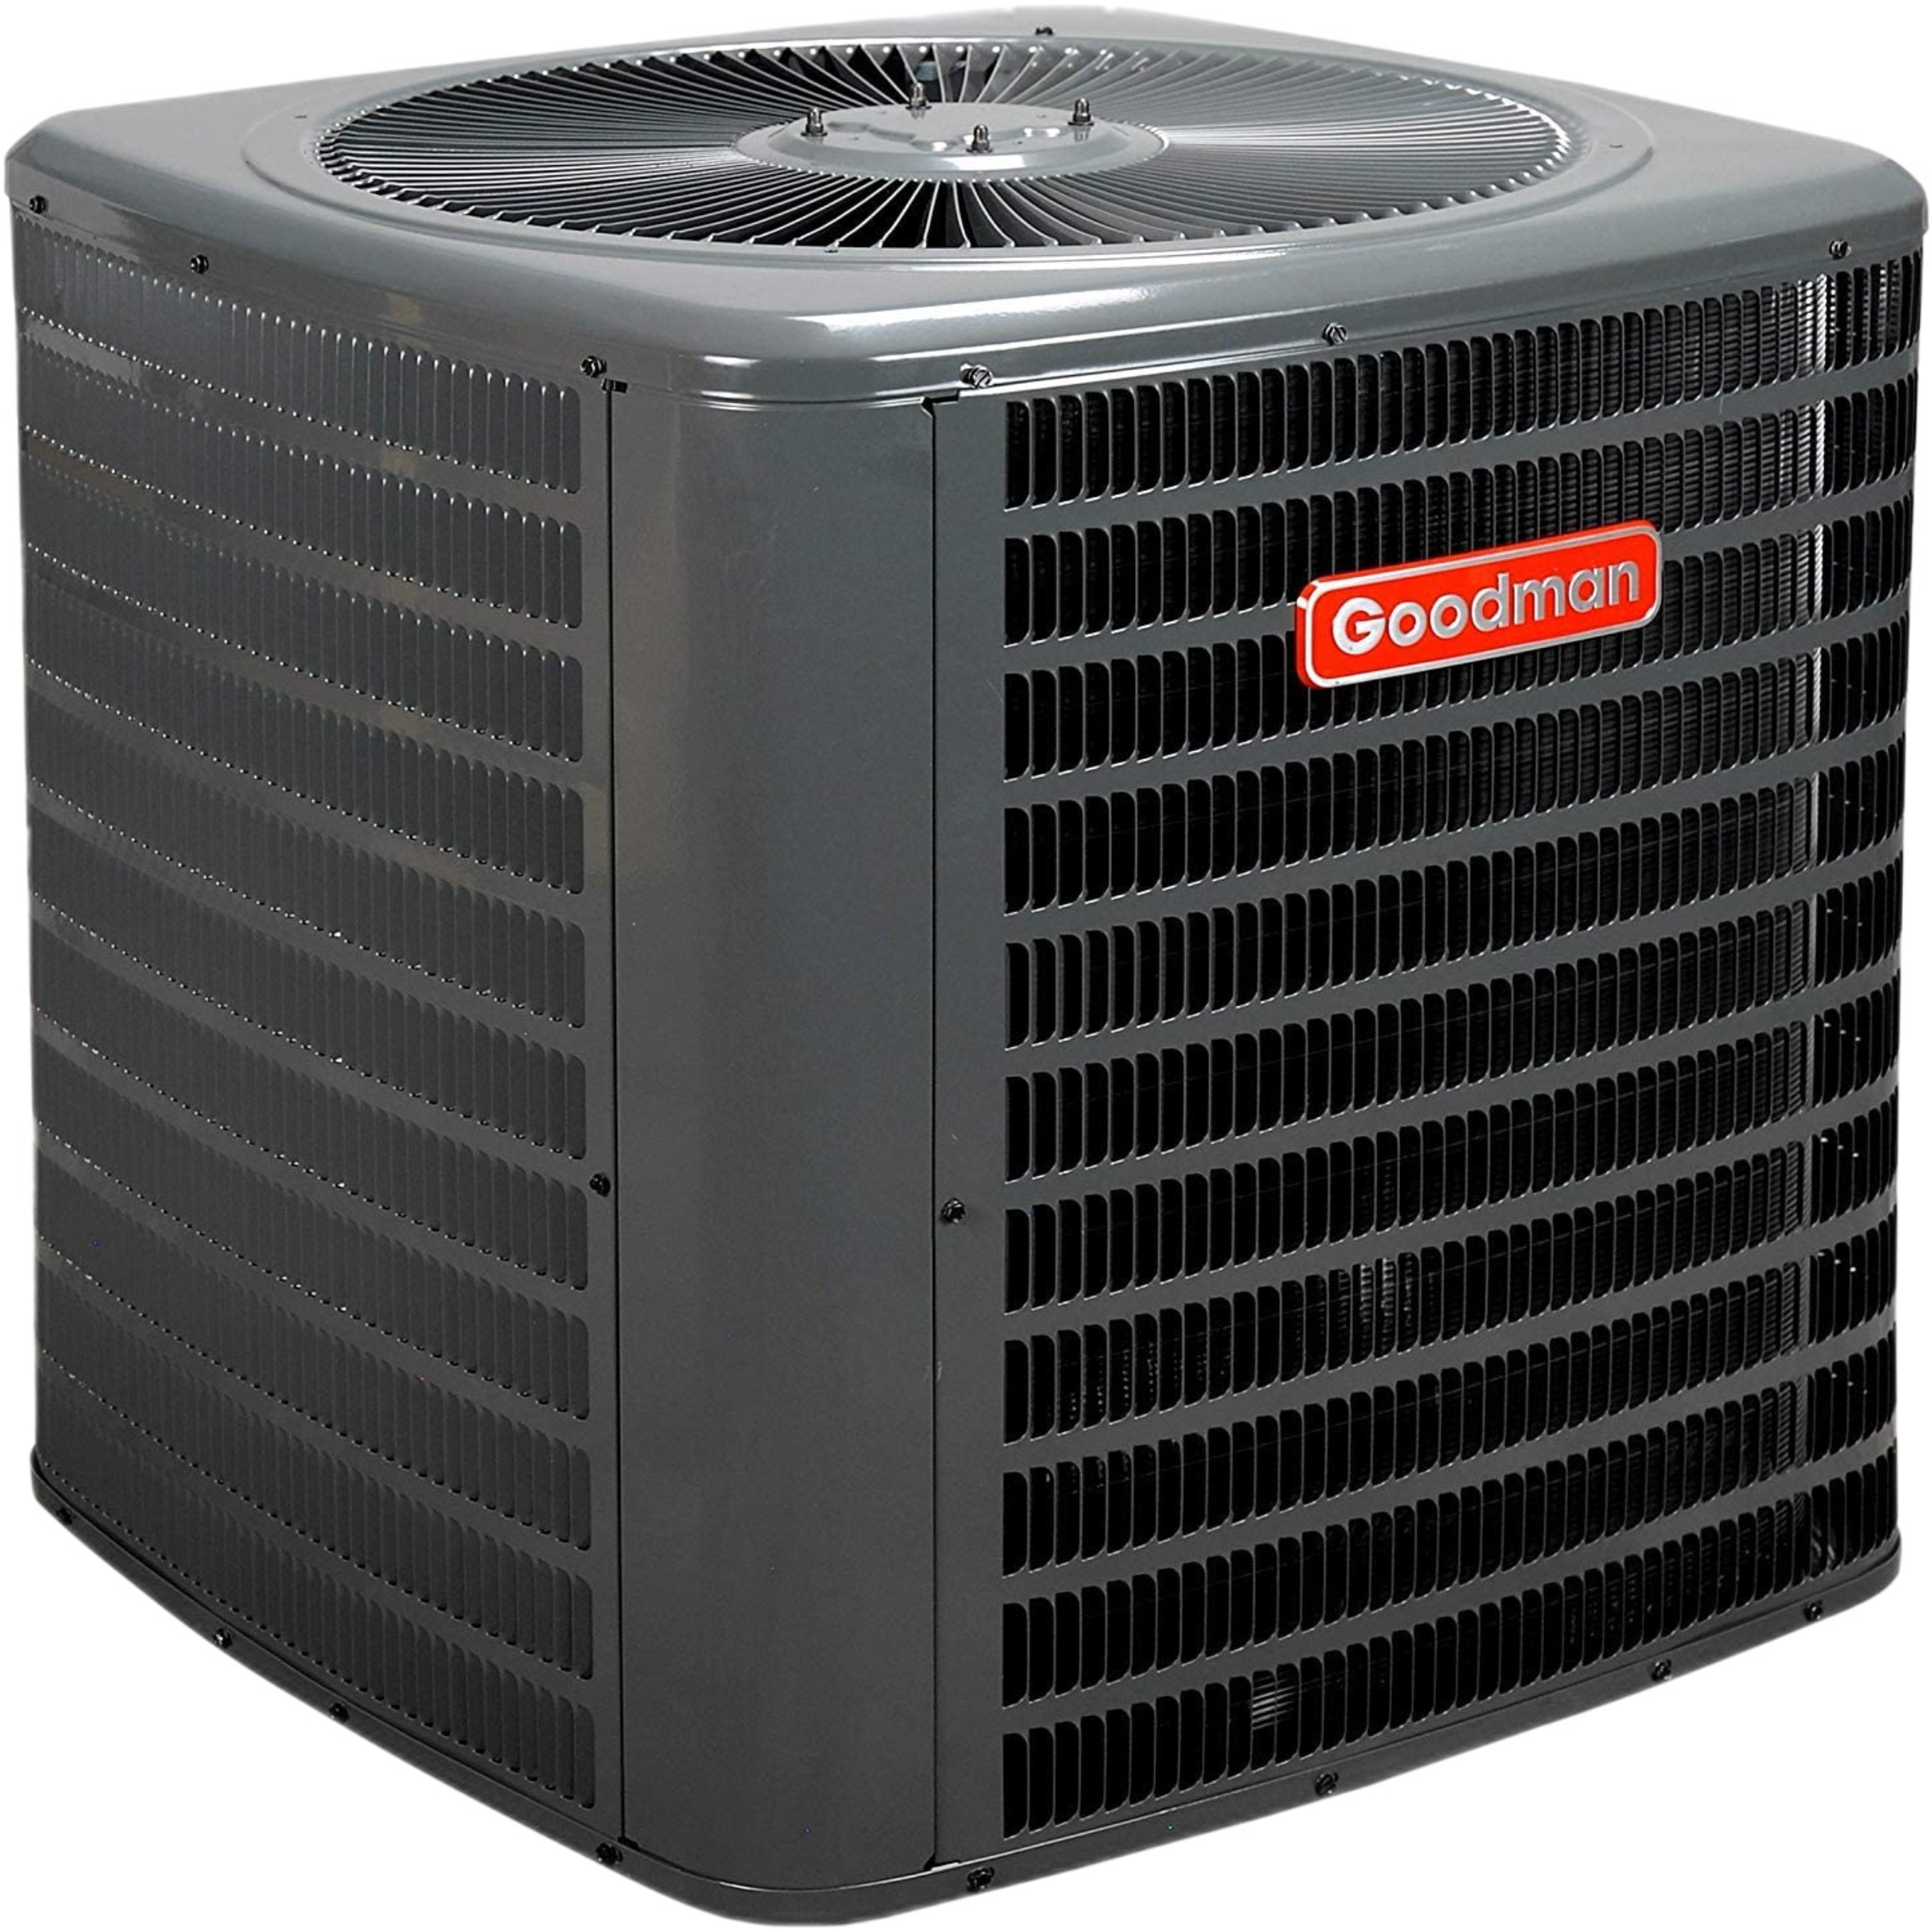 Air Conditioning Condensing Unit 14 SEER, Single-Phase, 1.5 Ton, R410A